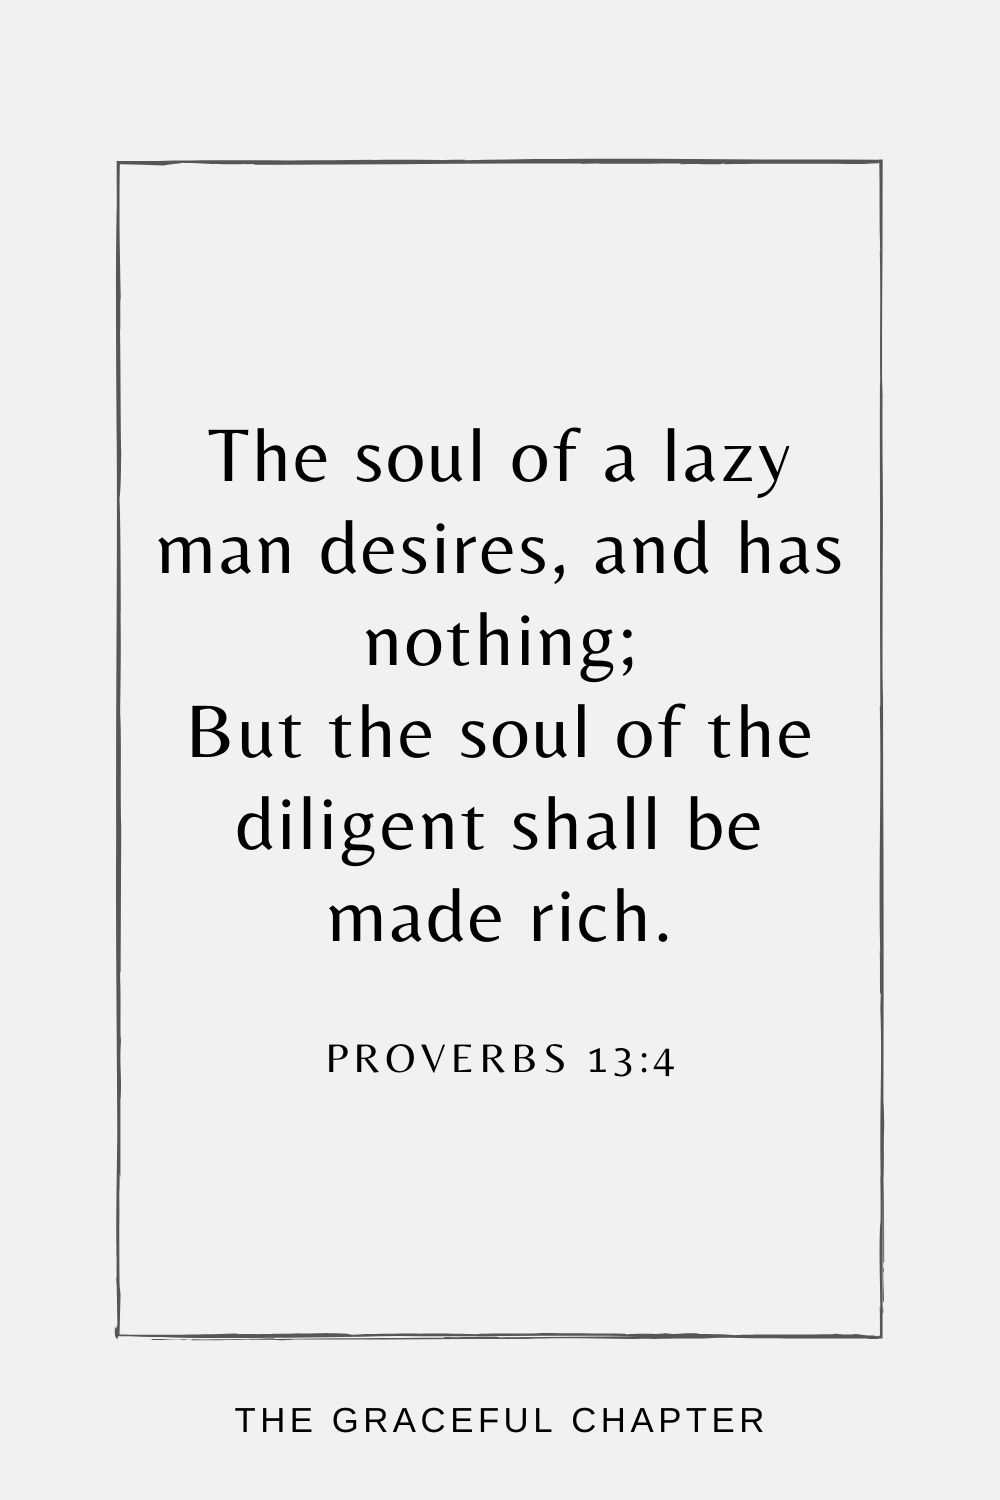 The soul of a lazy man desires, and has nothing; But the soul of the diligent shall be made rich. Proverbs 13:4